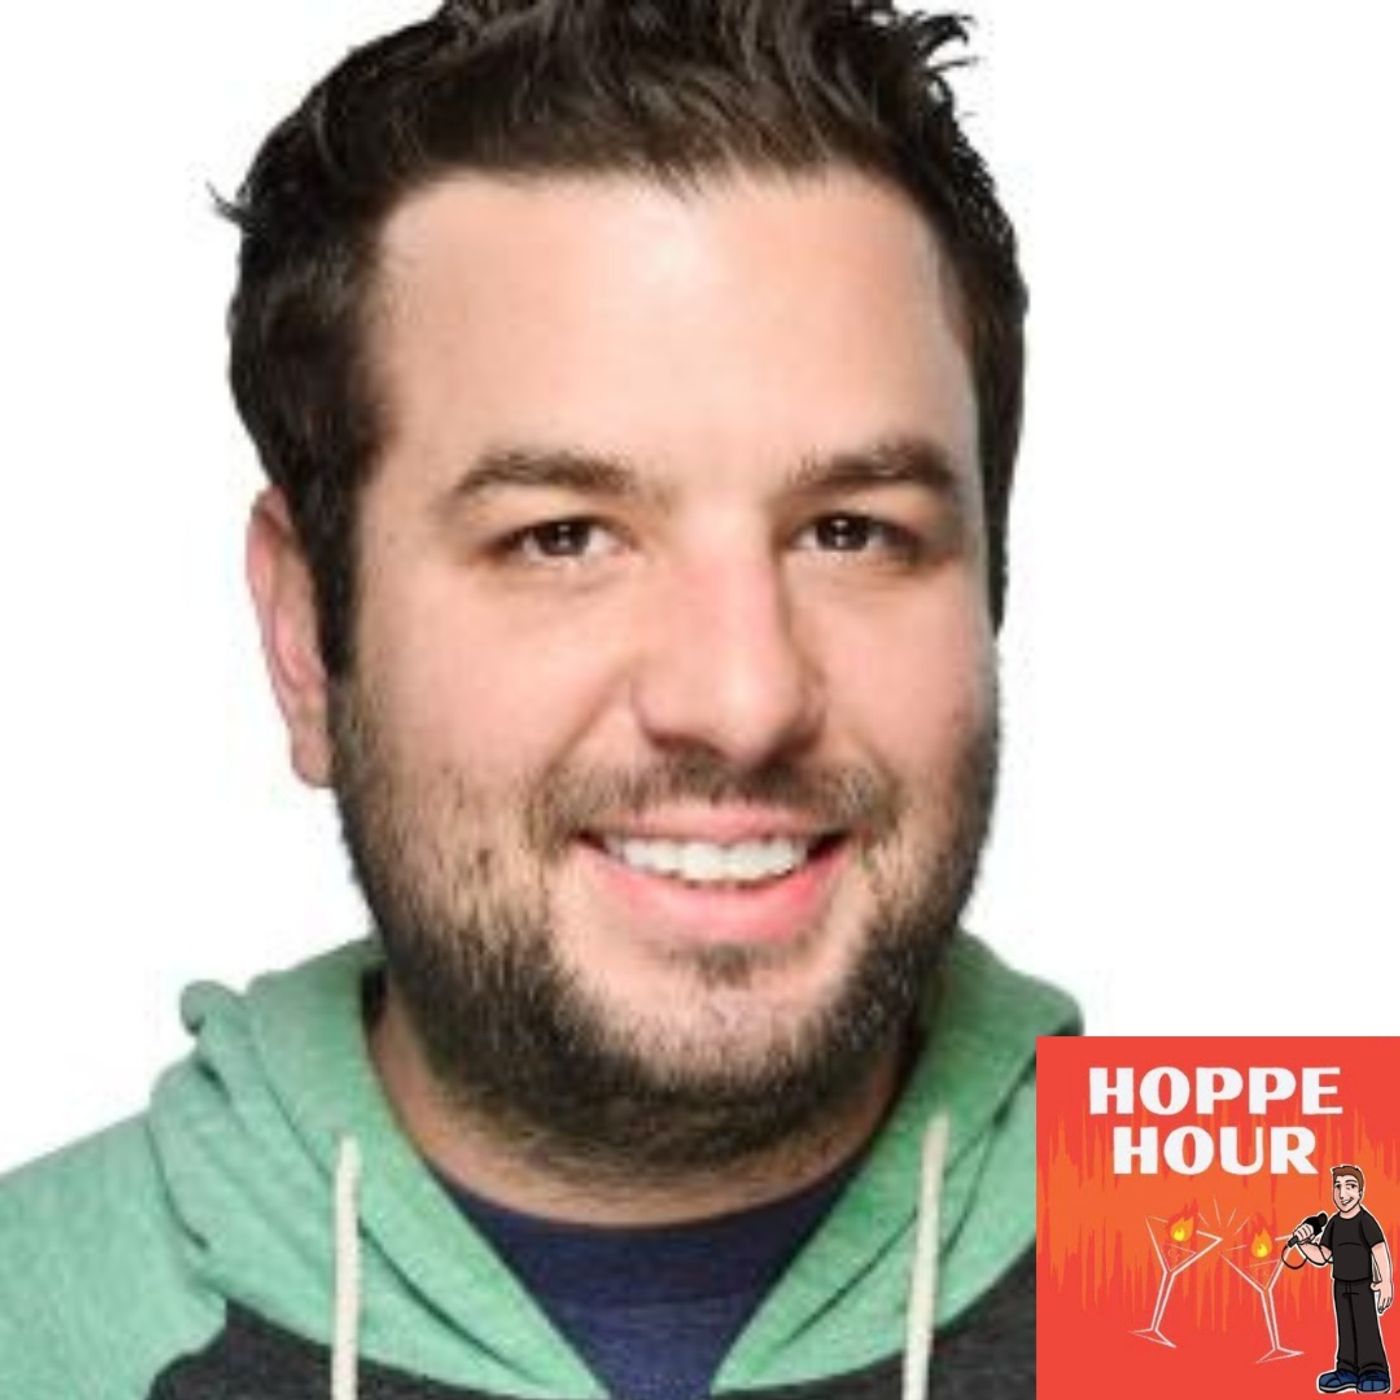 Scott Rizzuto From The Rizzuto Show Calls Into Hoppe Hour With Ryan Hoppe